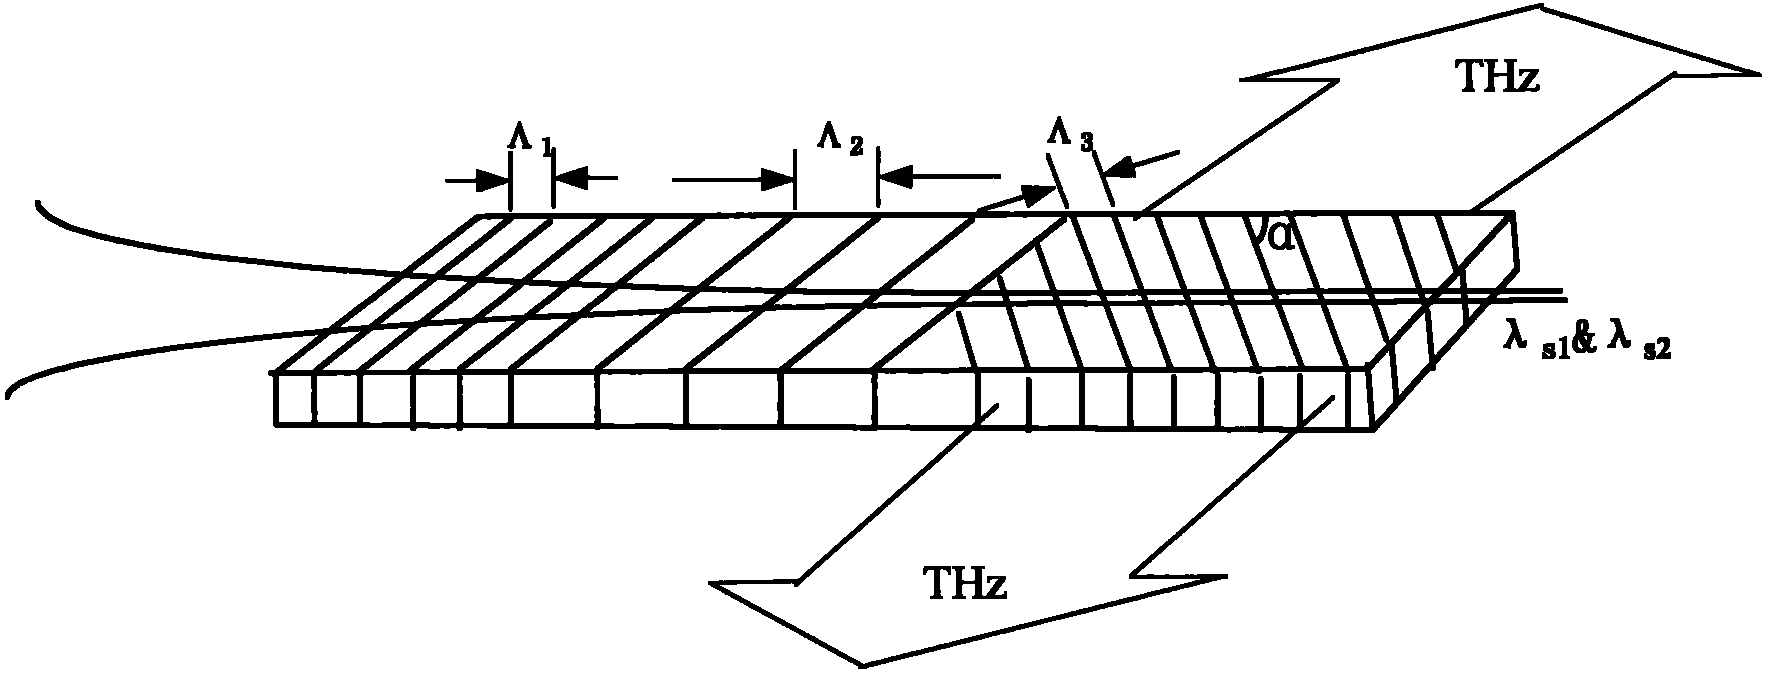 Device for outputting dual wavelength laser and terahertz wave based on single periodical and polarized crystal